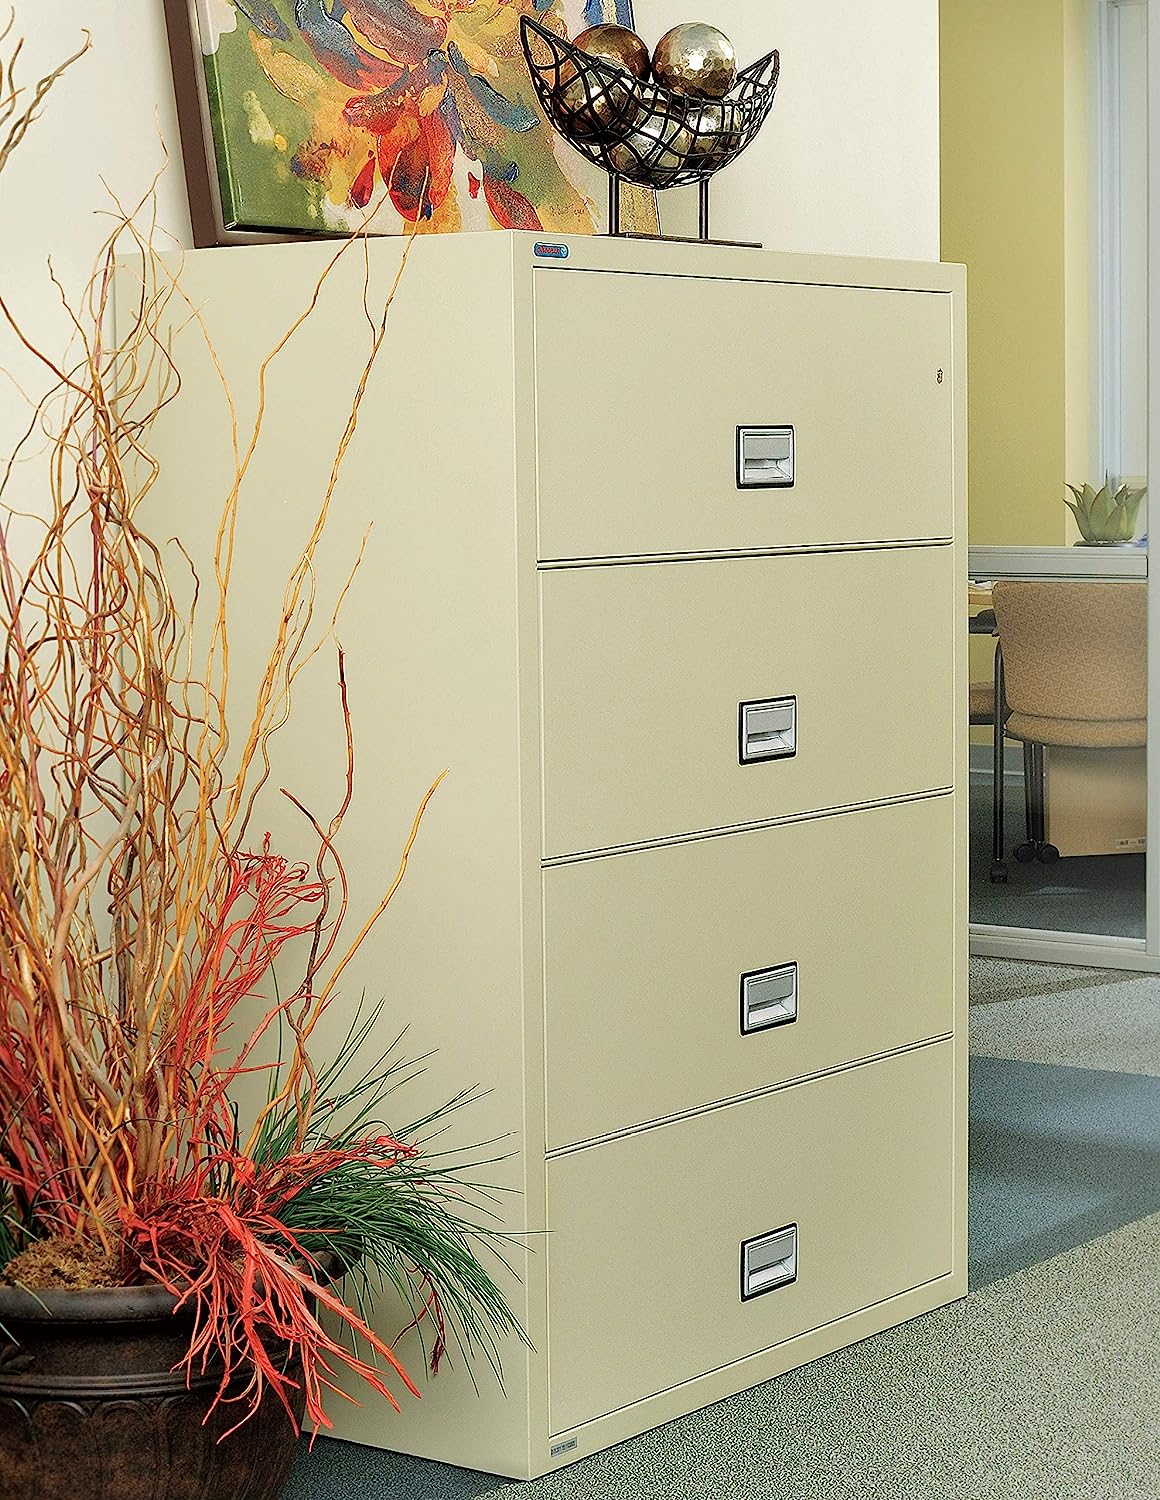 How To Unlock A Filing Cabinet Without A Key